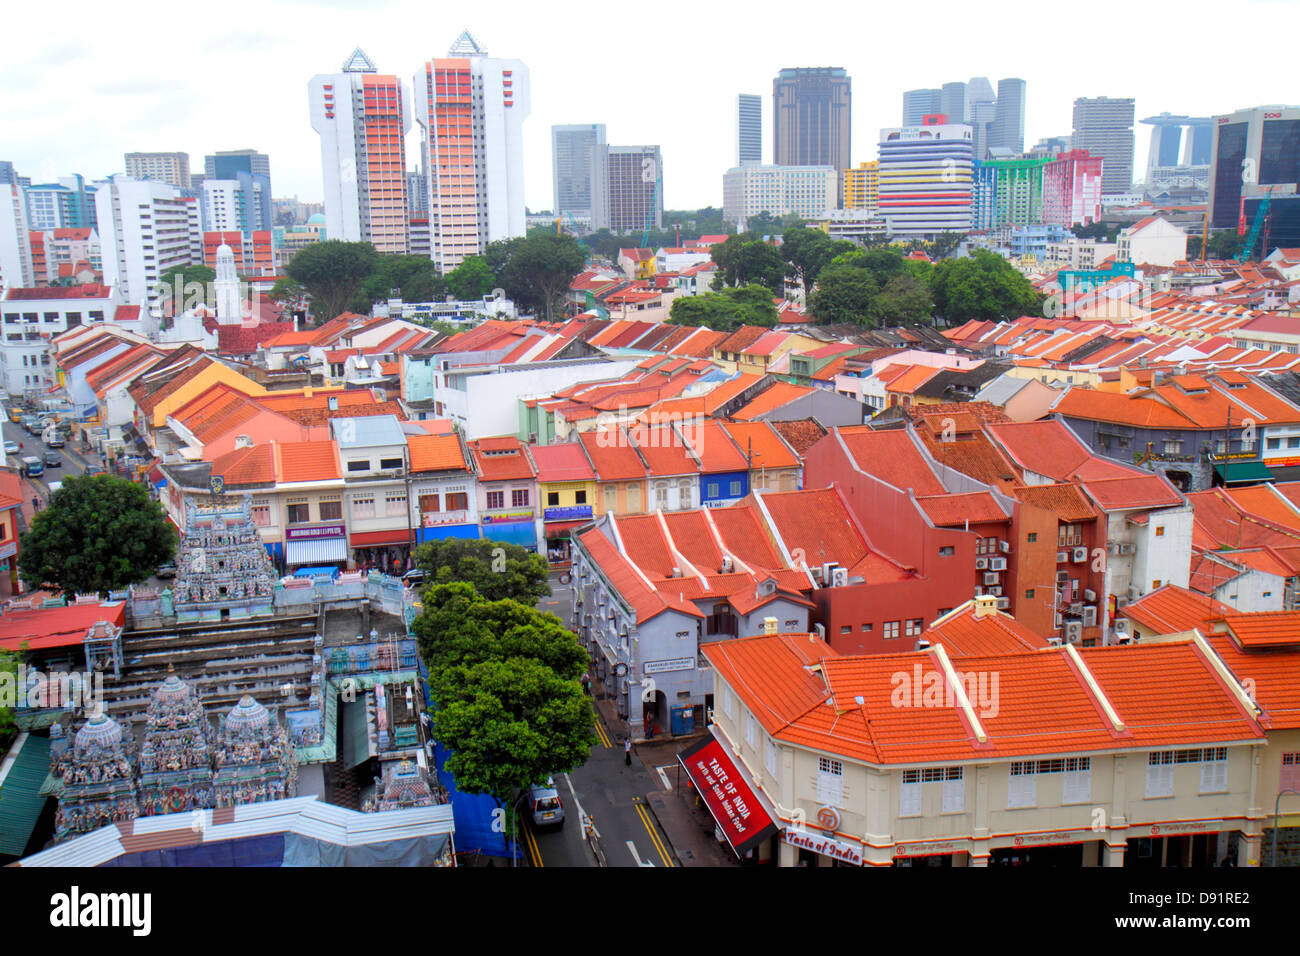 Singapore,Little India,aerial overhead view from above,Sri Veeramakaliamman Temple,Hindu,bindi,two-story,storey,shophouses,shophouse,red clay tile roo Stock Photo